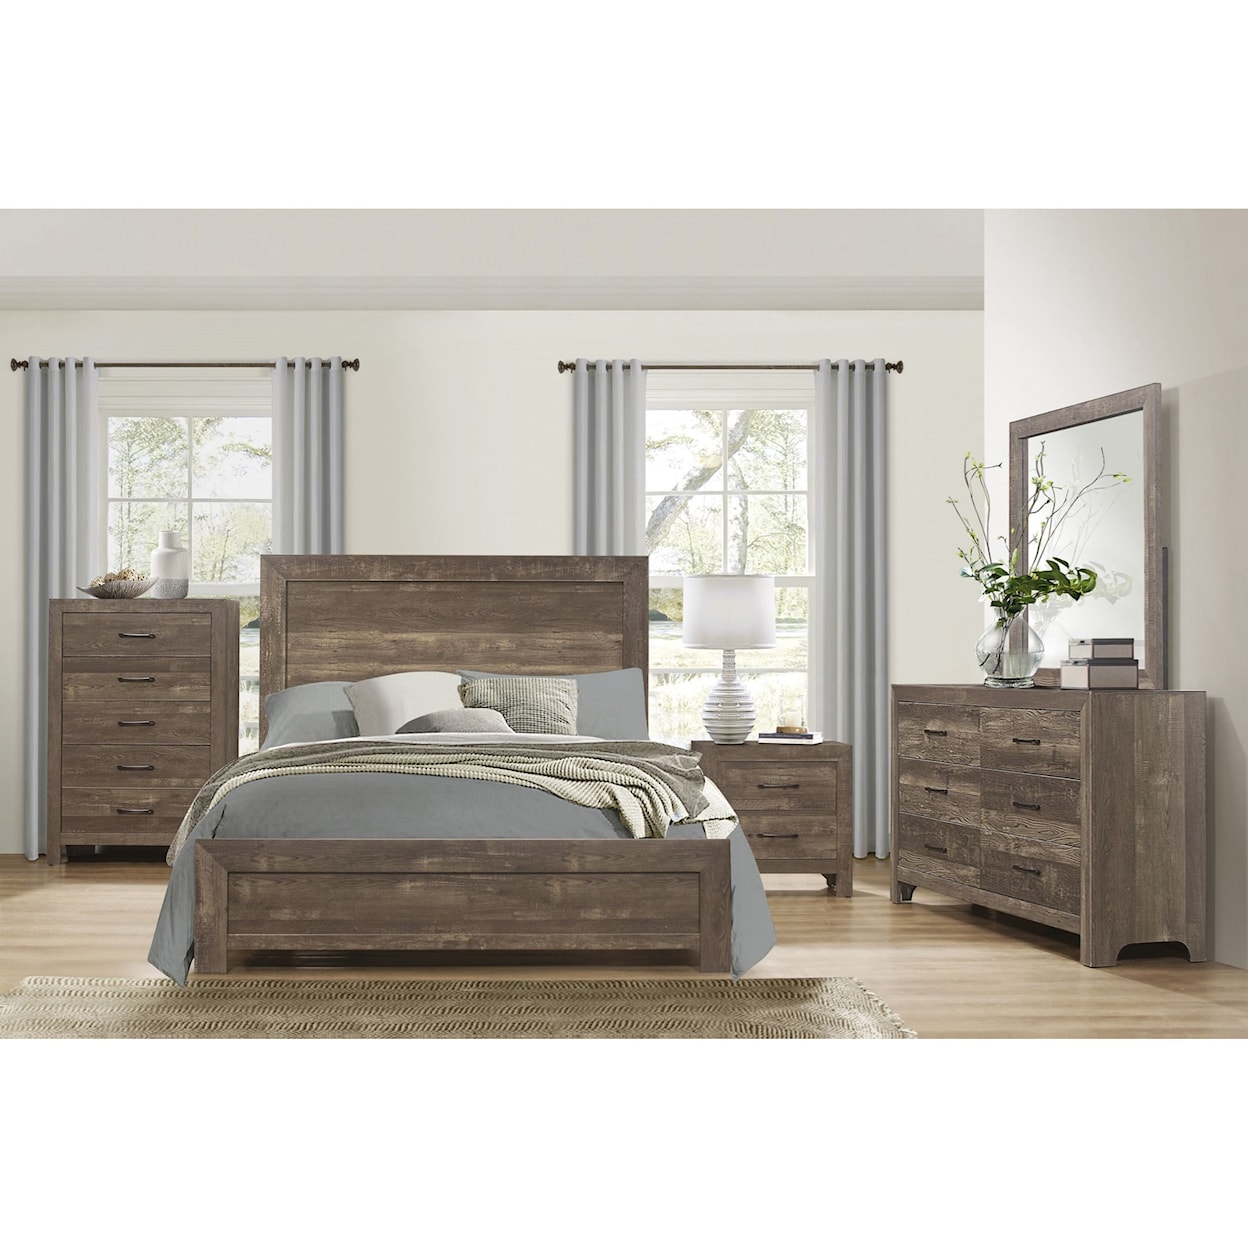 Home Style Warrick King Bedroom Group